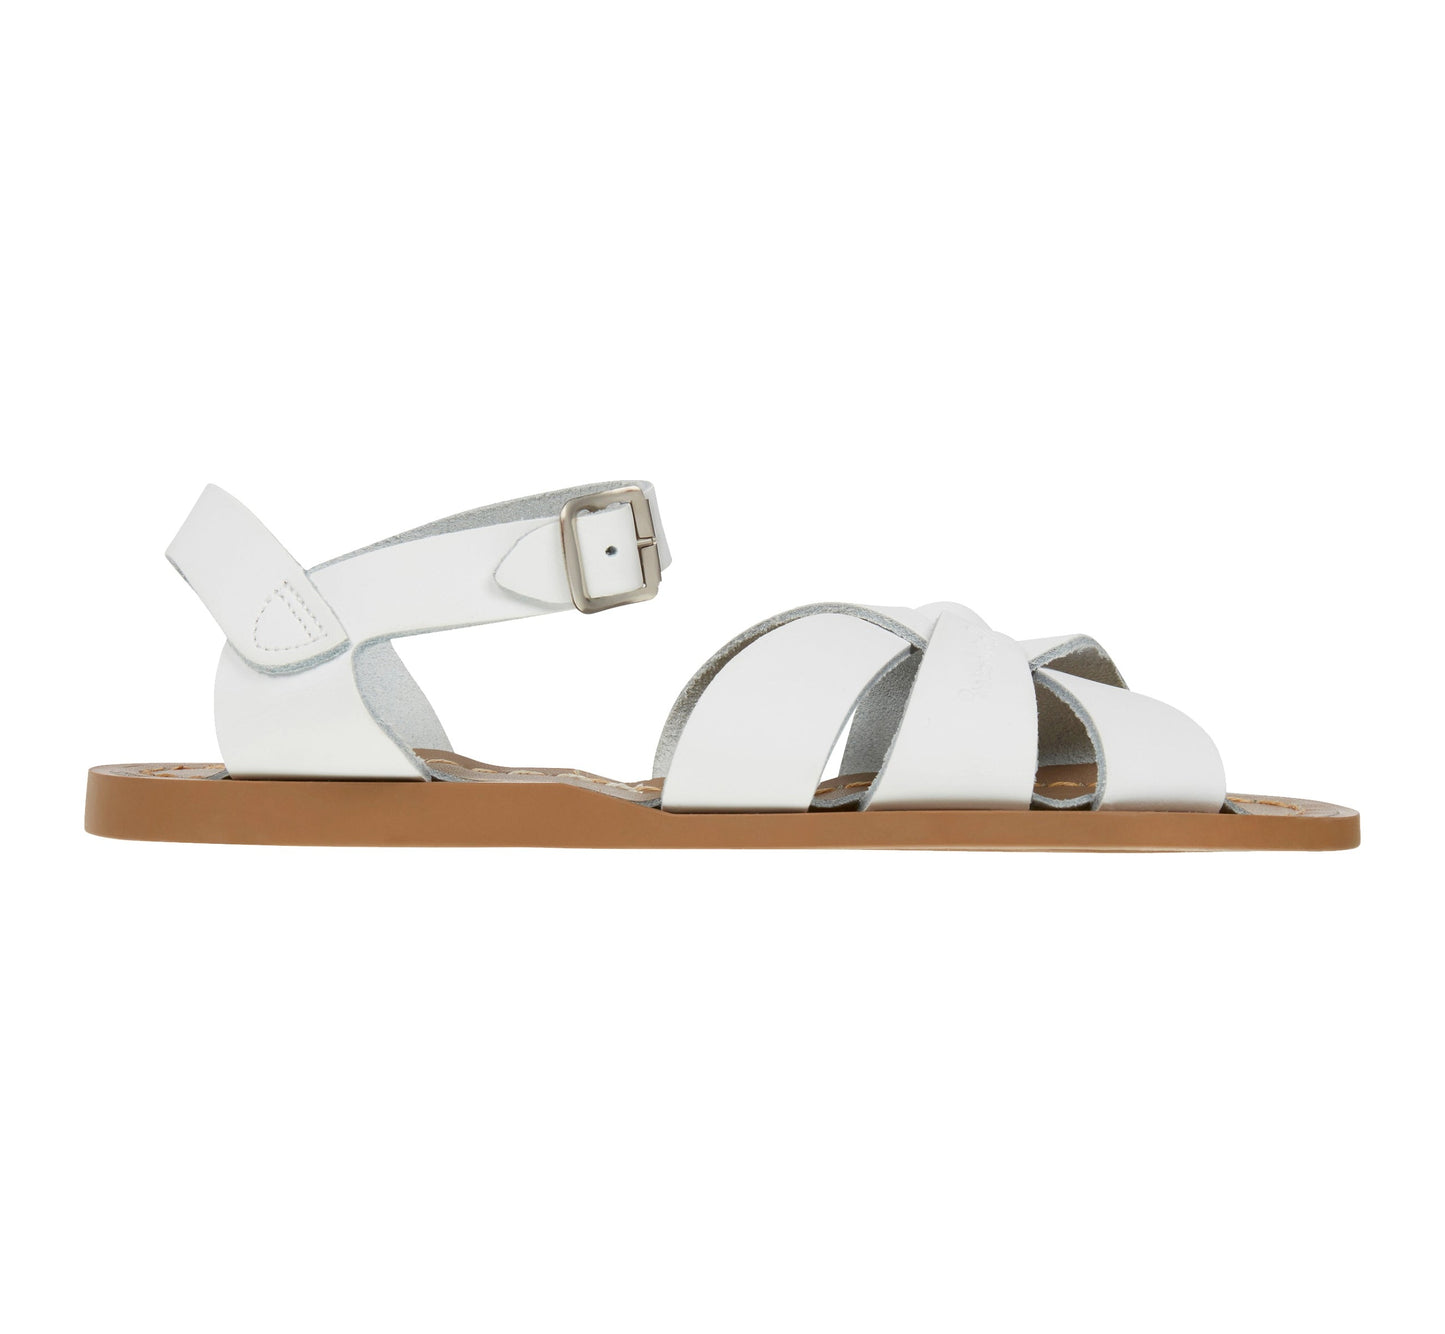 An original girls sandal by Salt Water Sandals in white with single buckle fastening around the ankle. Open Toe and Sling-back with woven detail on the front. Right Side view.